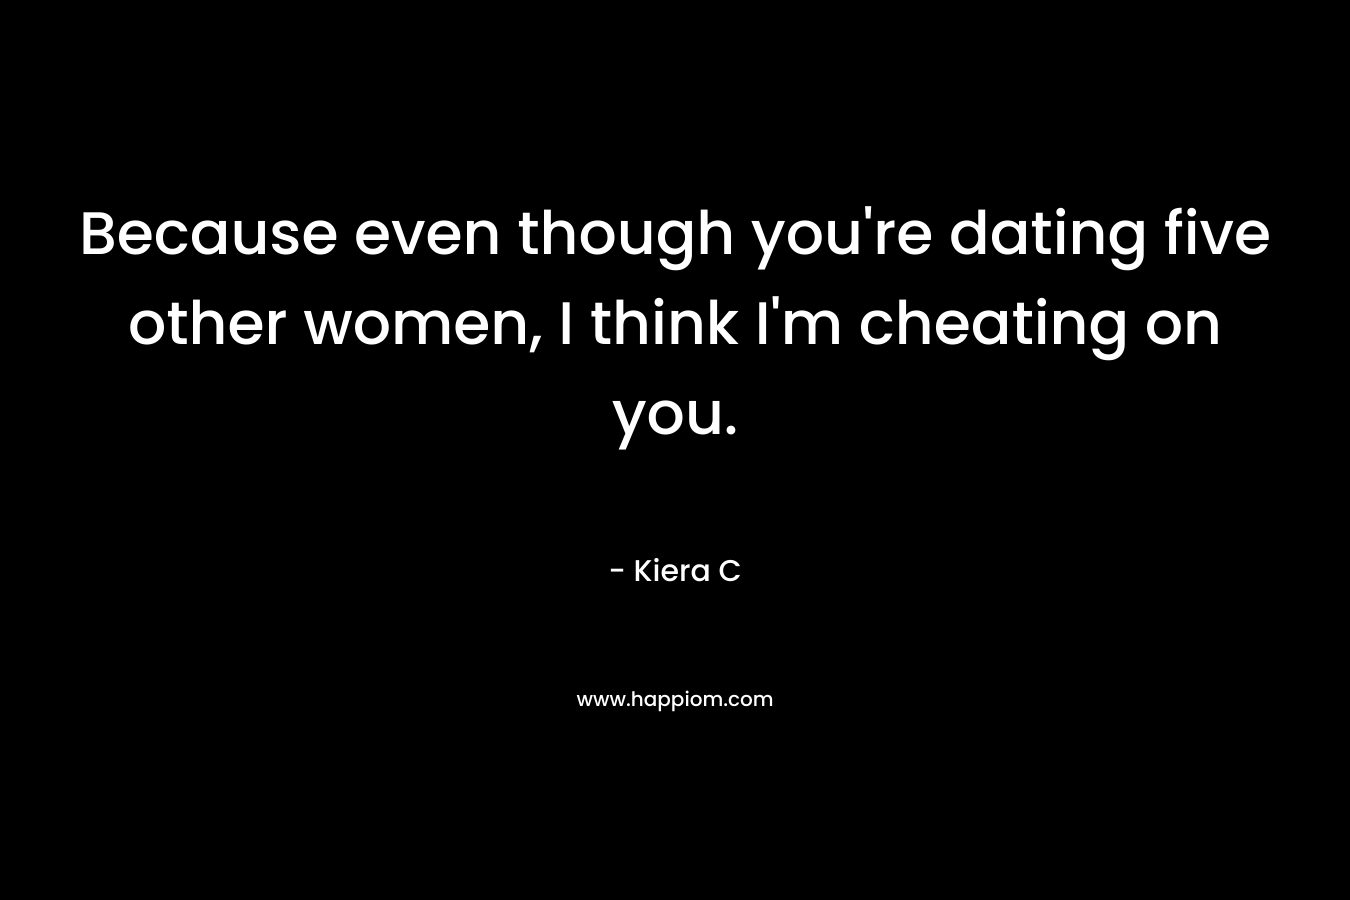 Because even though you're dating five other women, I think I'm cheating on you.